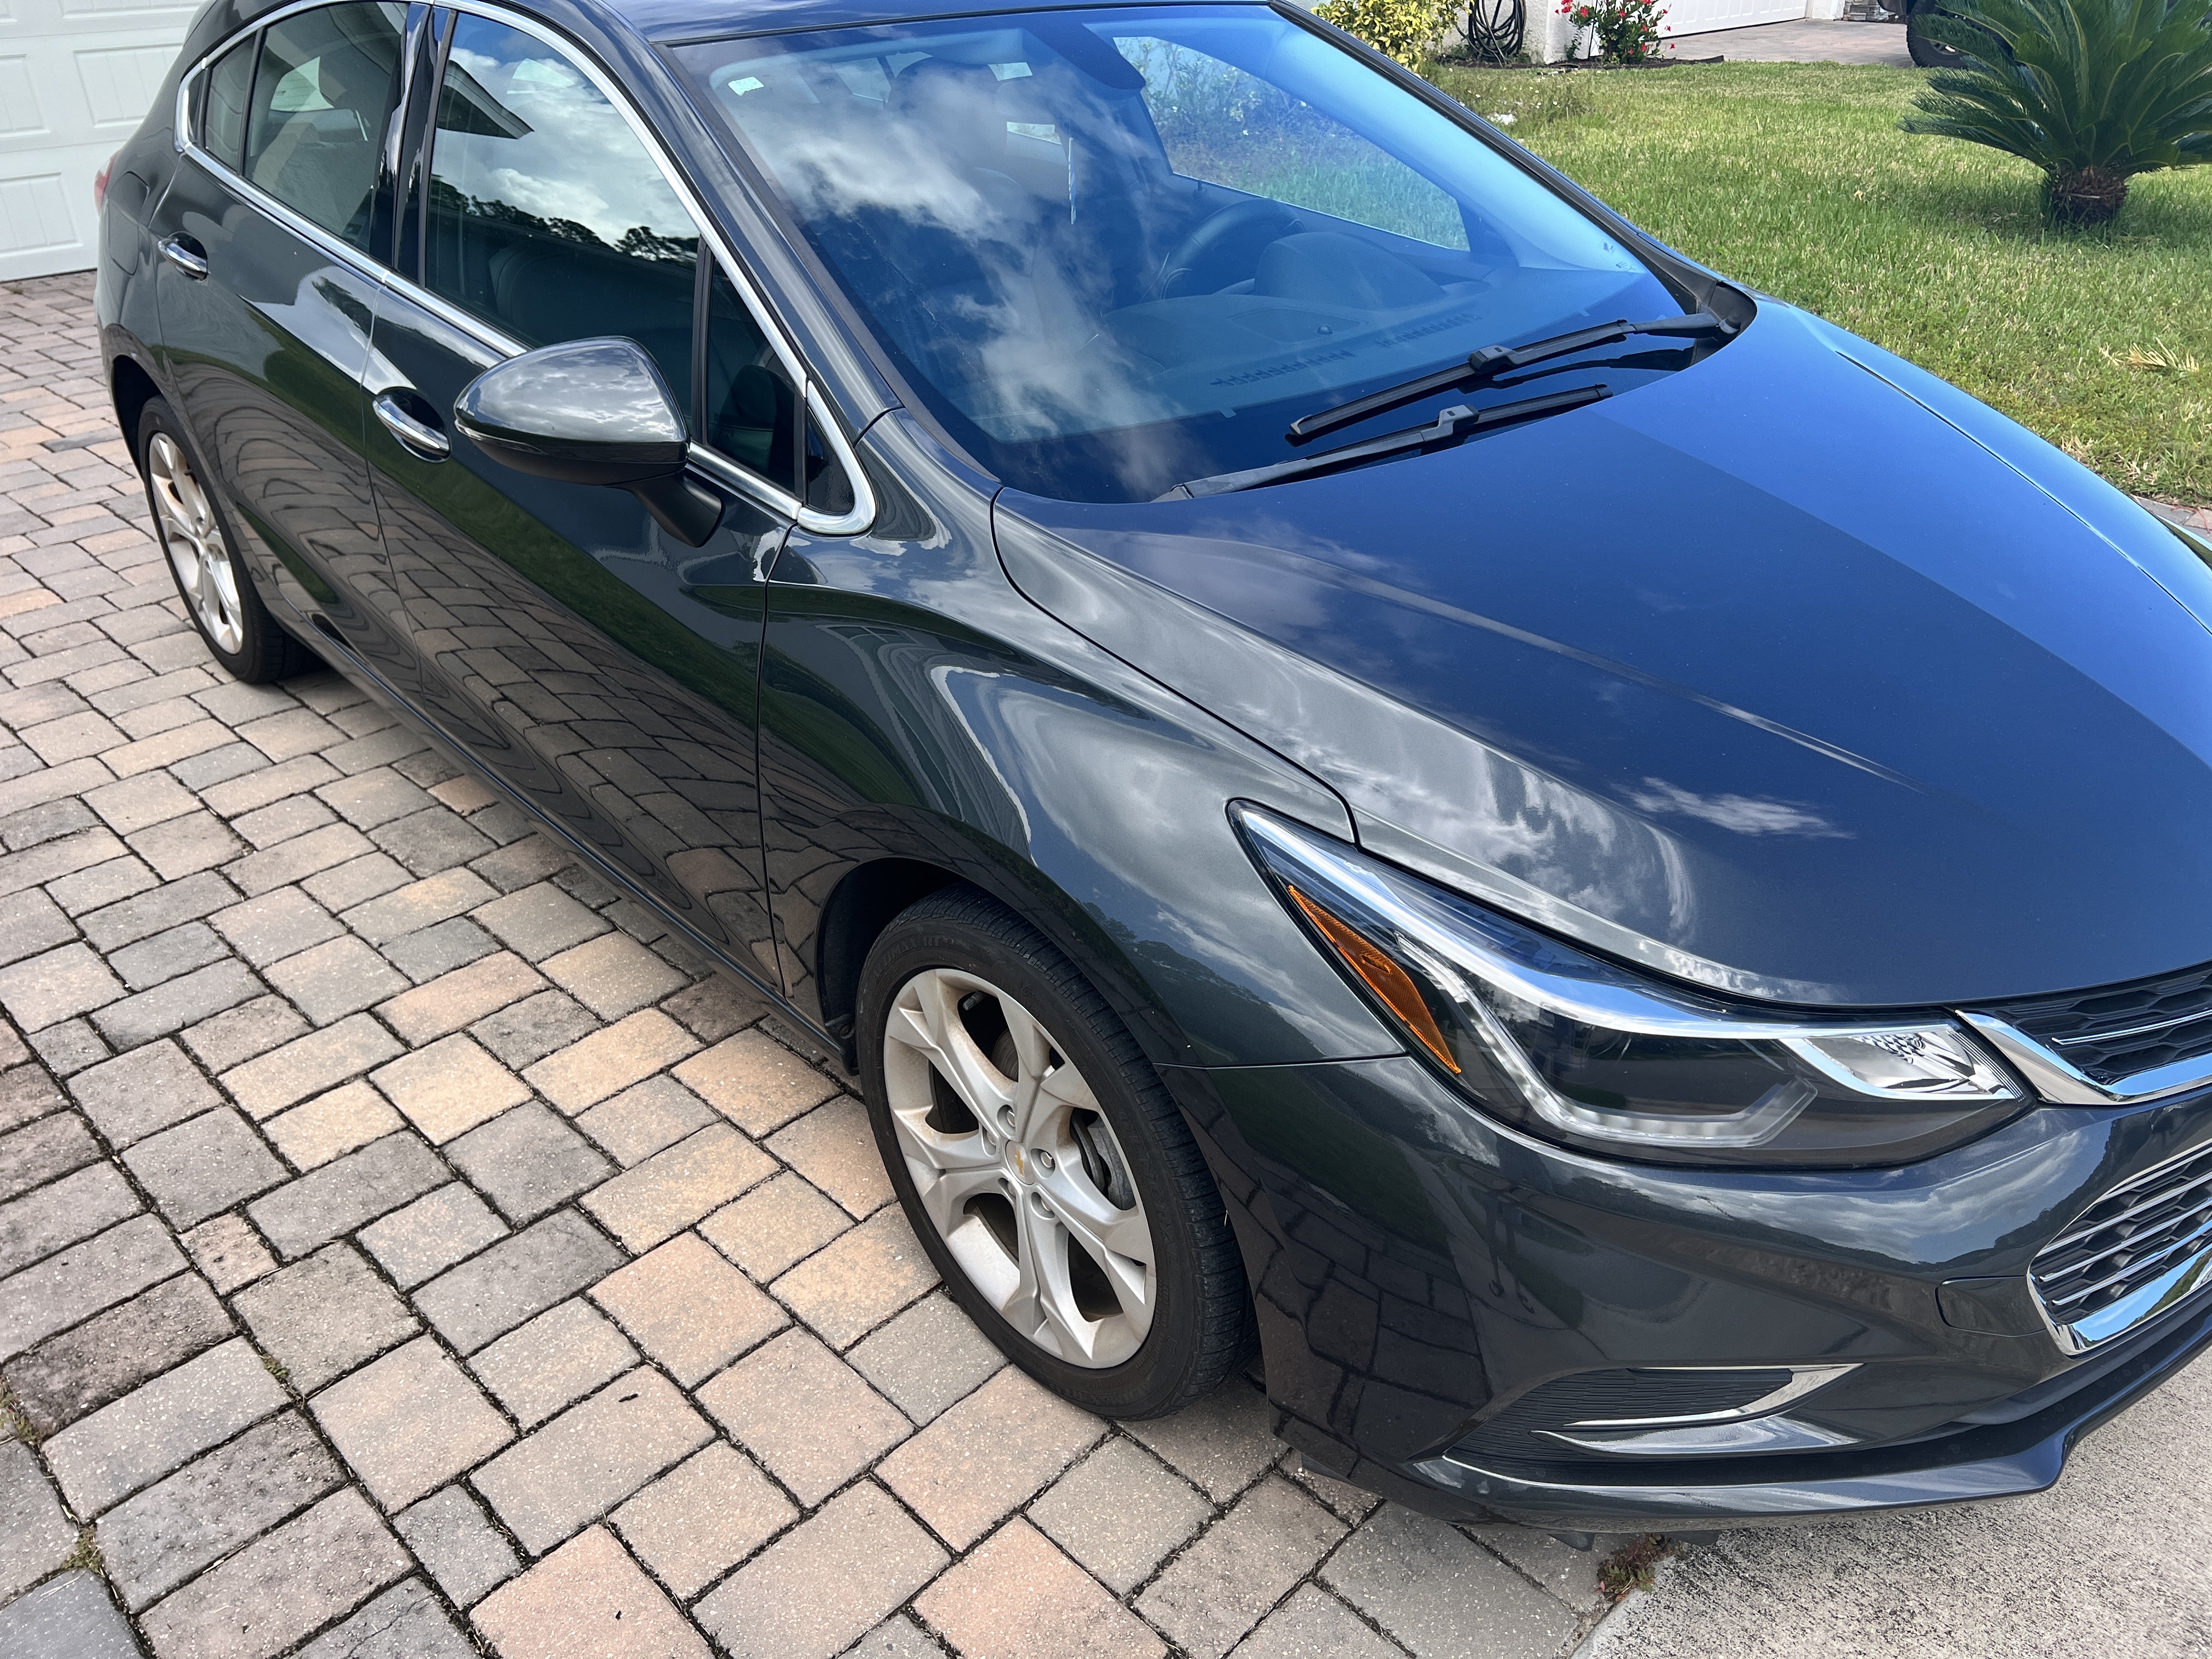 Used 2018 Chevrolet Cruze Premier for Sale Right Now - Autotrader